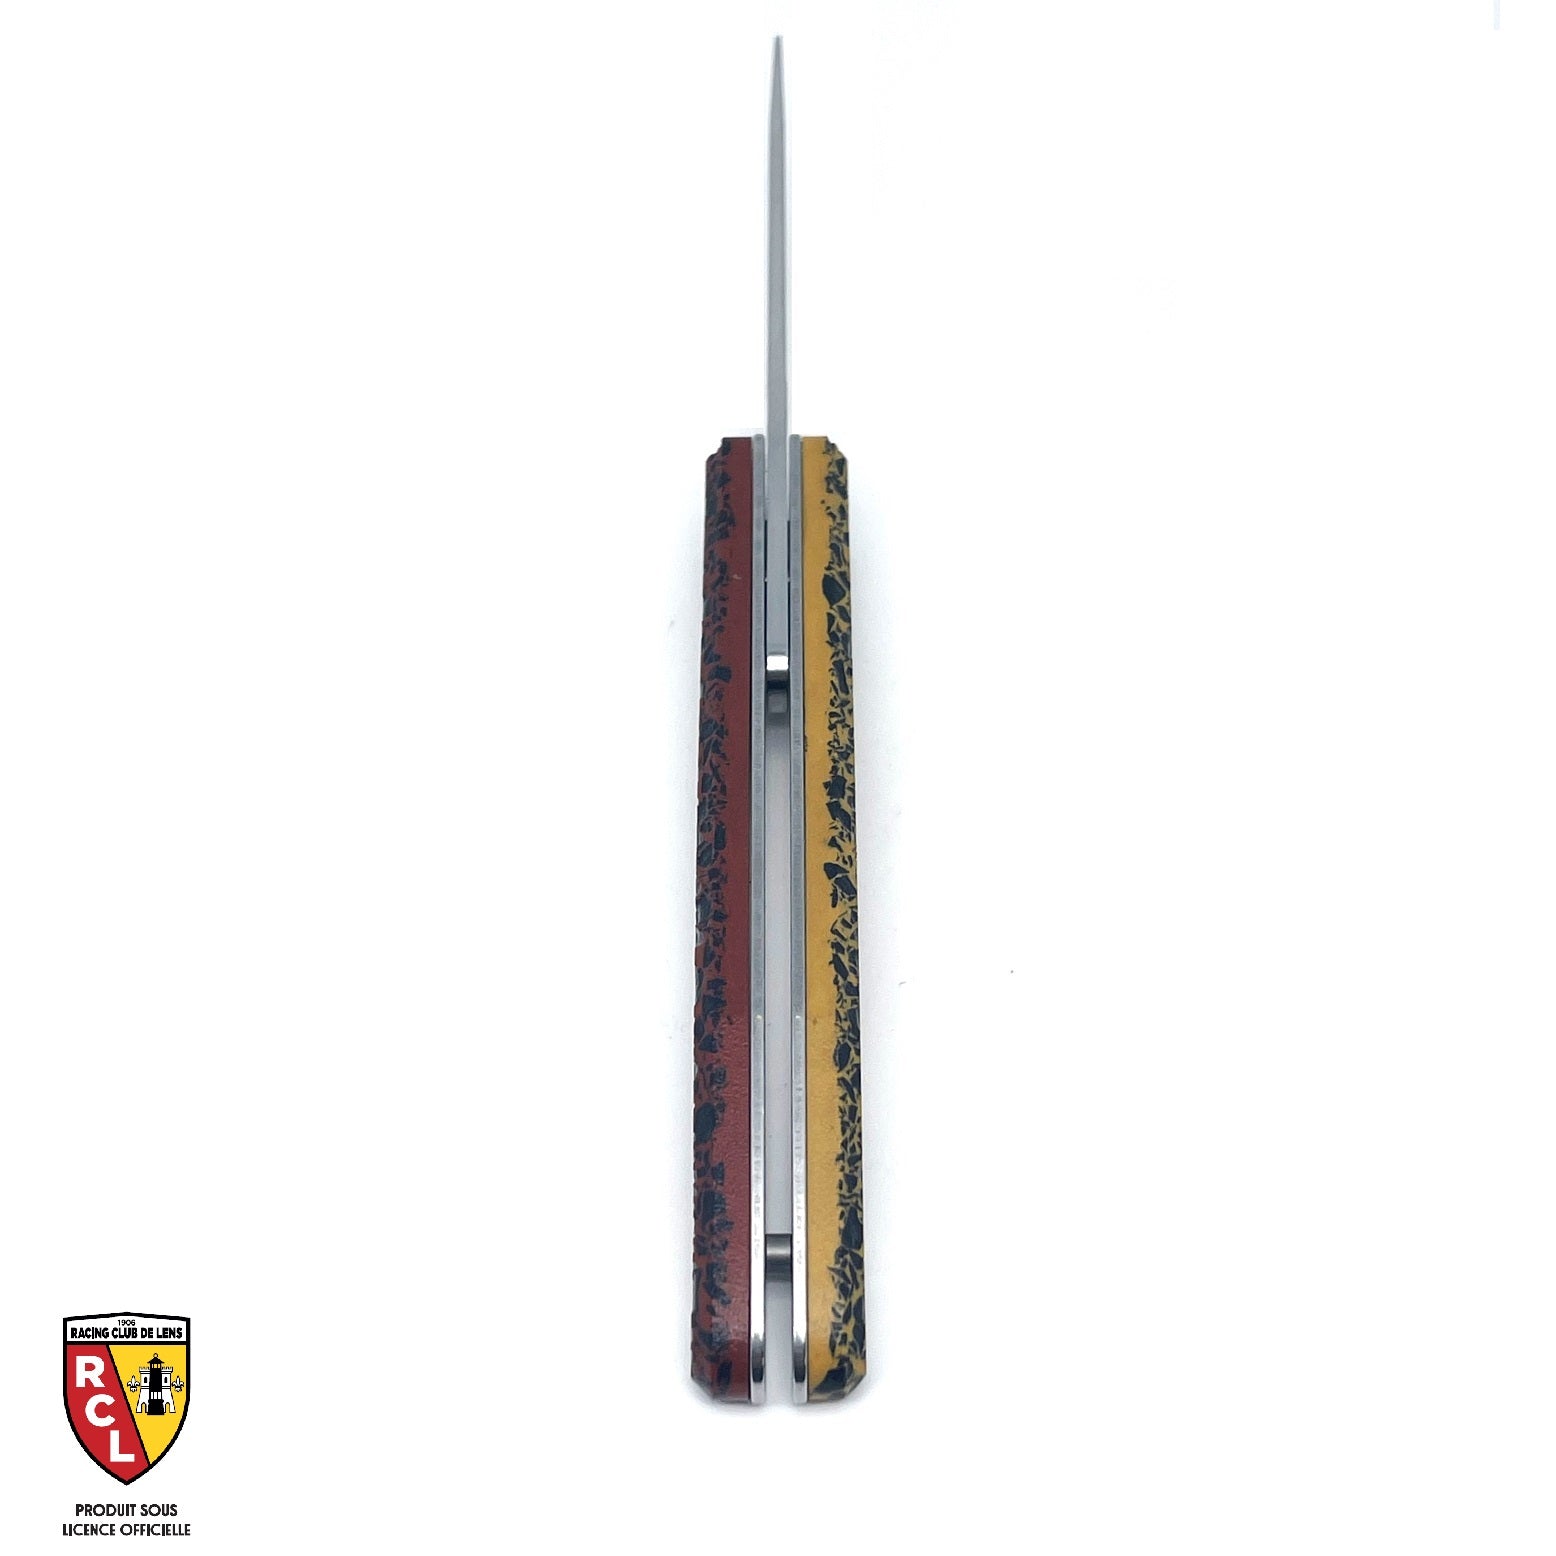 RC LENS Piedmontese knife with its BLOOD and GOLD charcoal handle (UNDER OFFICIAL LICENSE)